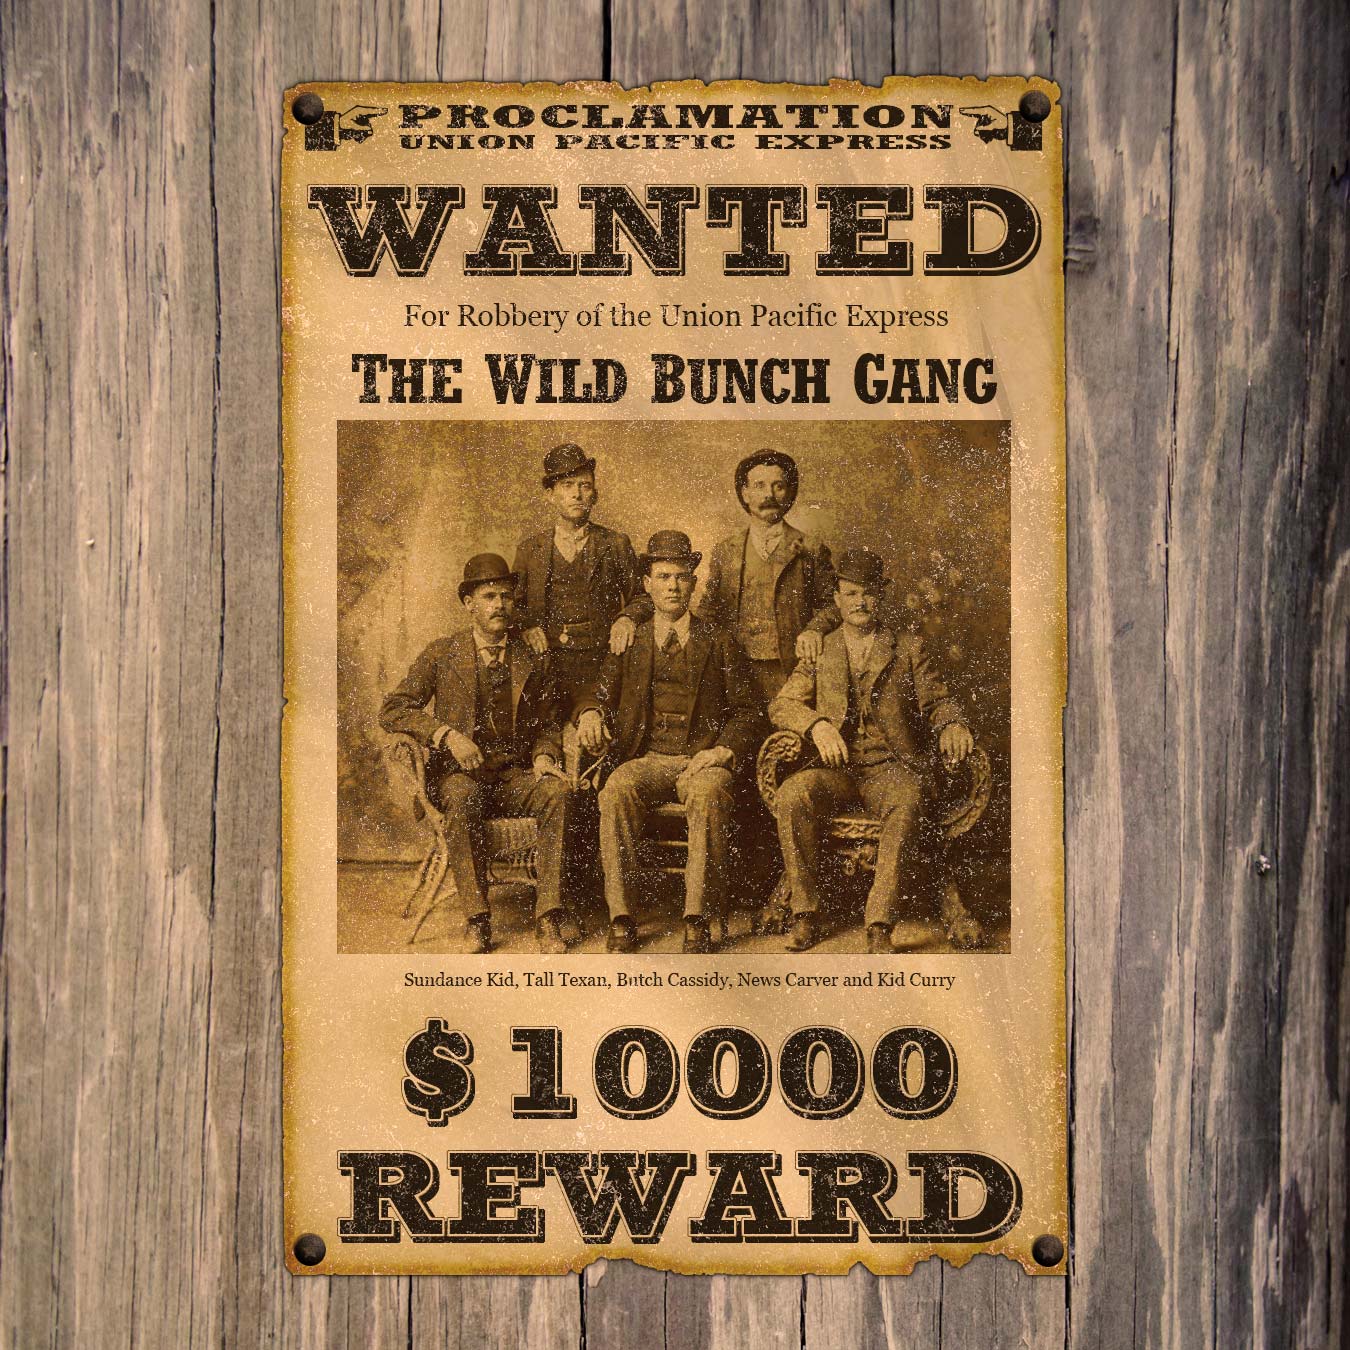 13 Western Wanted Poster Font Images